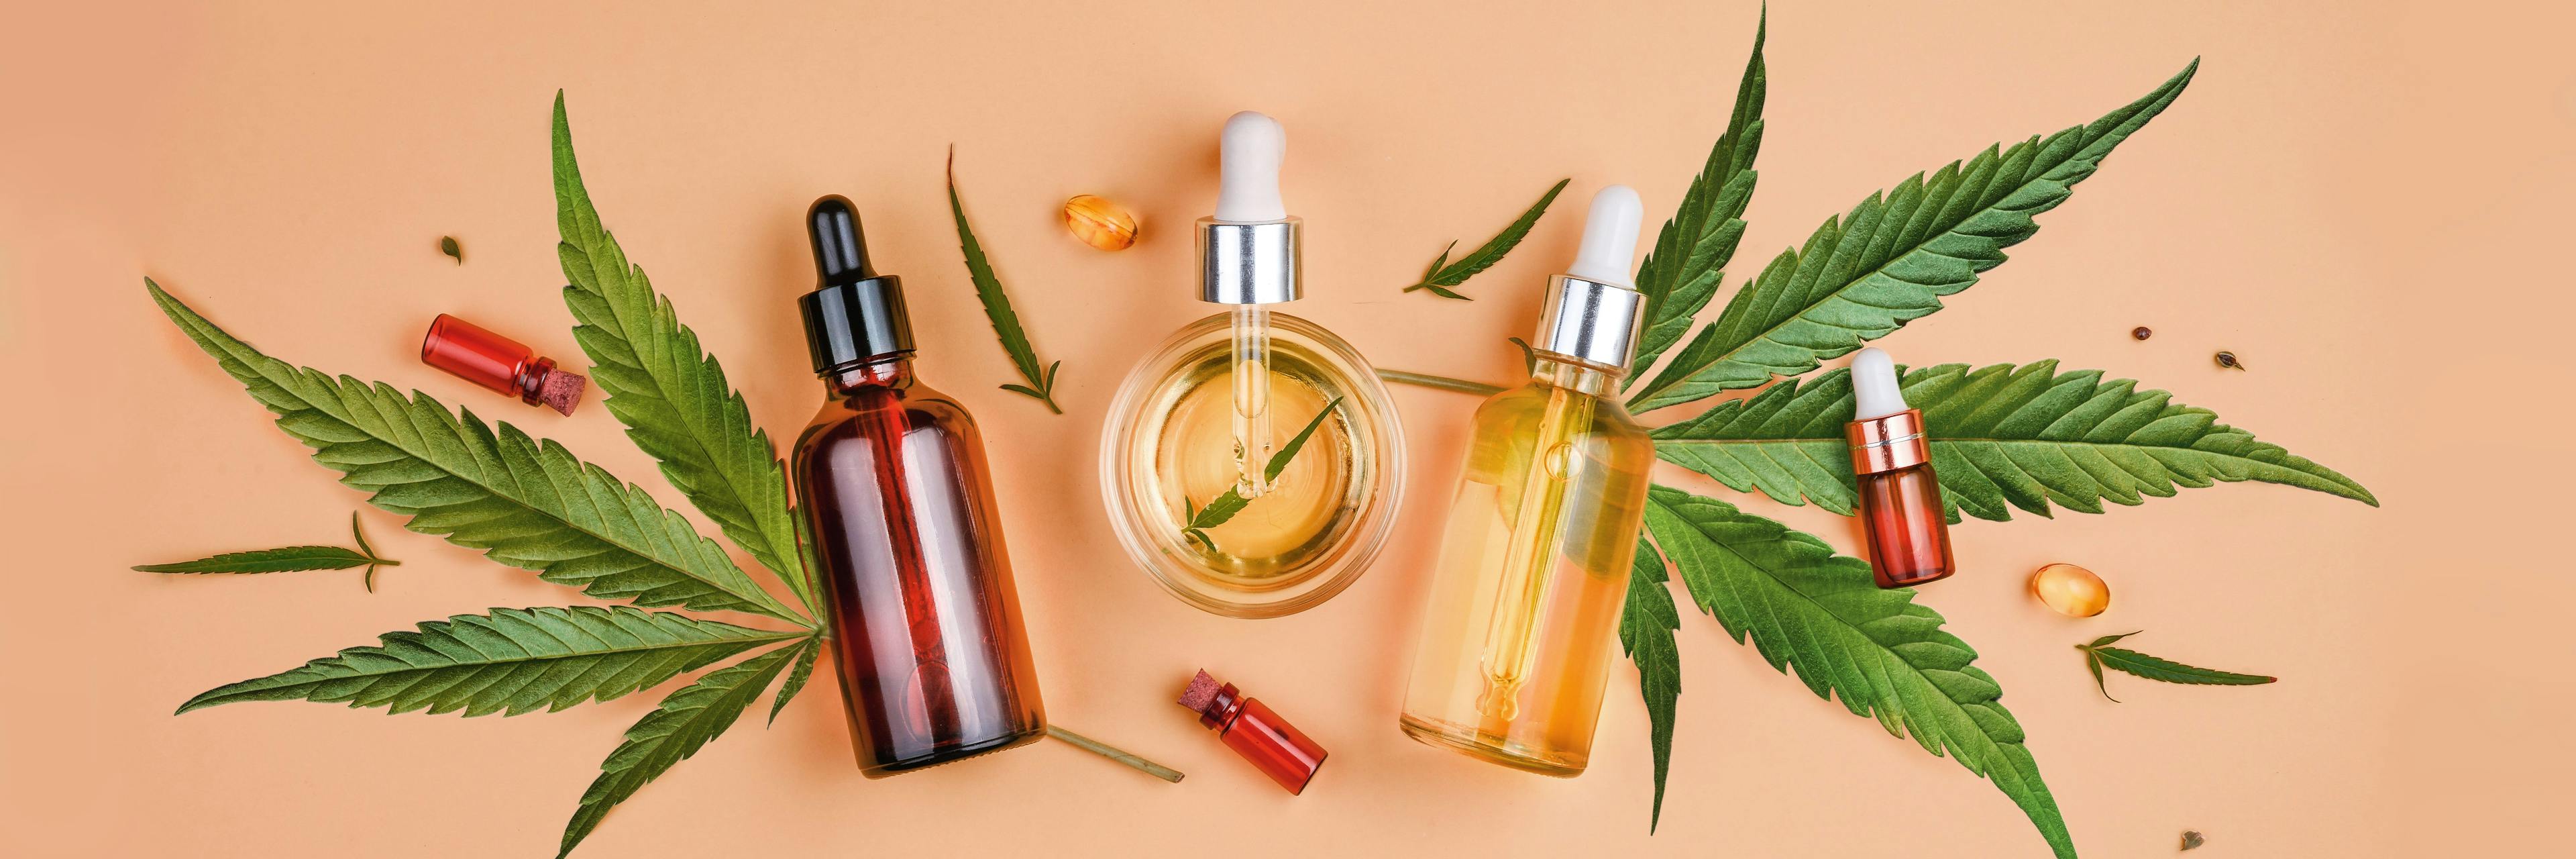 Does CBD benefit the skin?